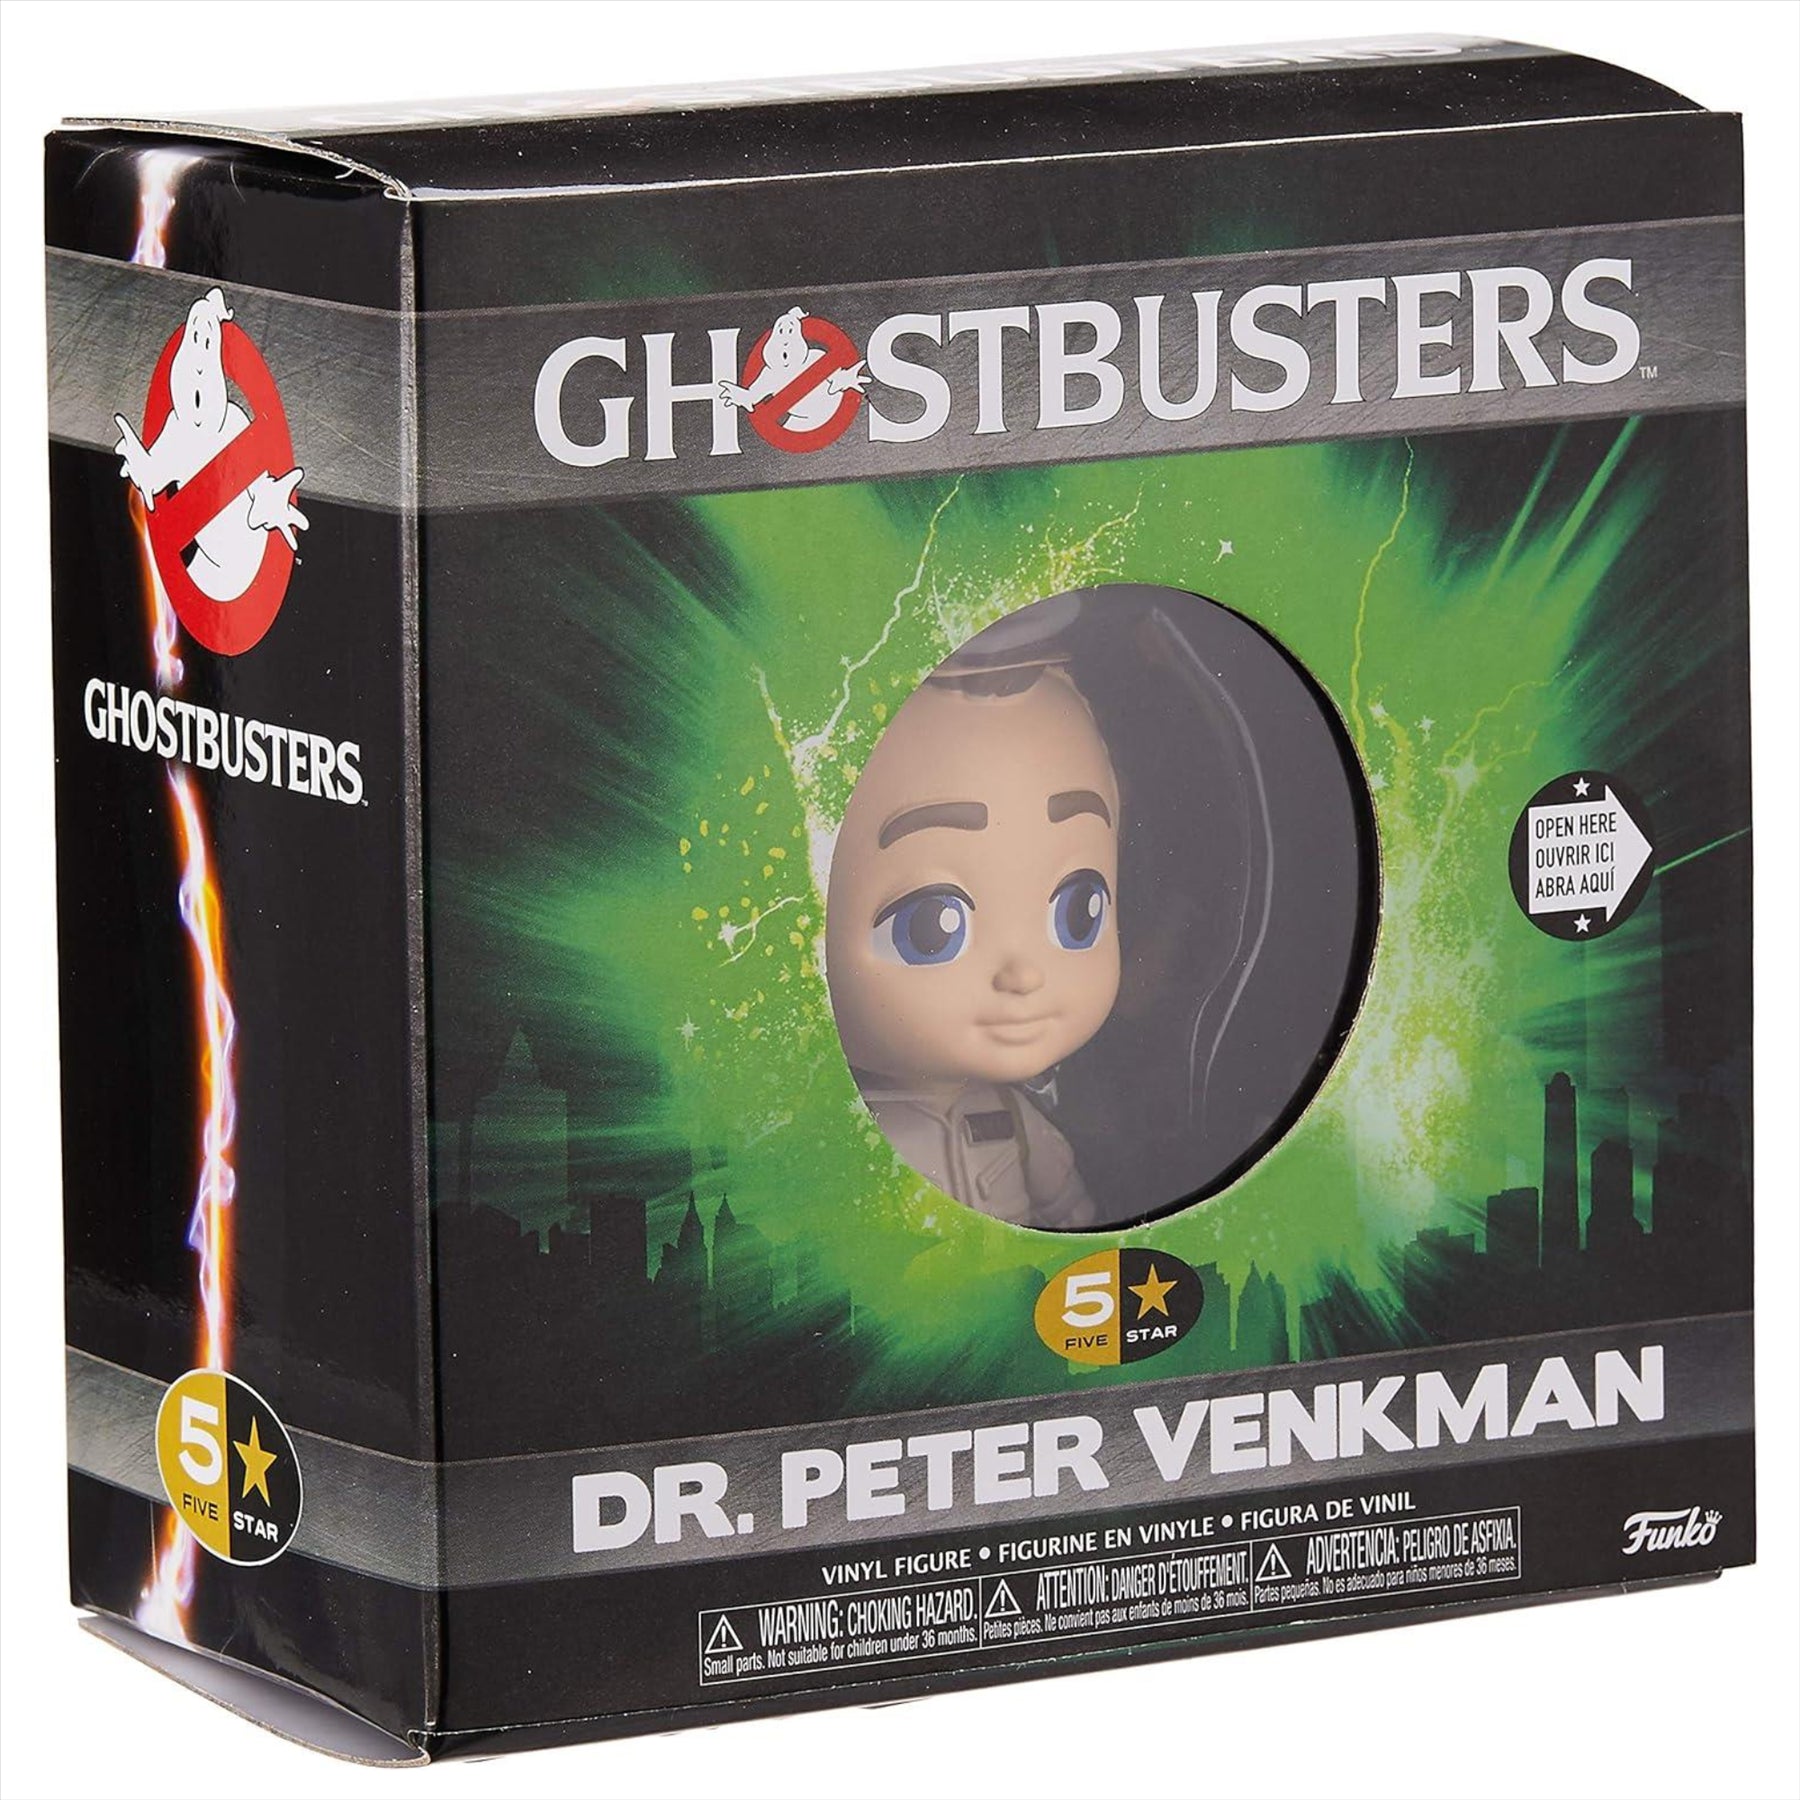 Funko! Five Star Ghostbusters Collectable Vinyl Figures, Official Merchandise - Dr. Raymond Stantz, Winston Zeddemore and Dr. Peter Venkman - 3 Pack - Toptoys2u